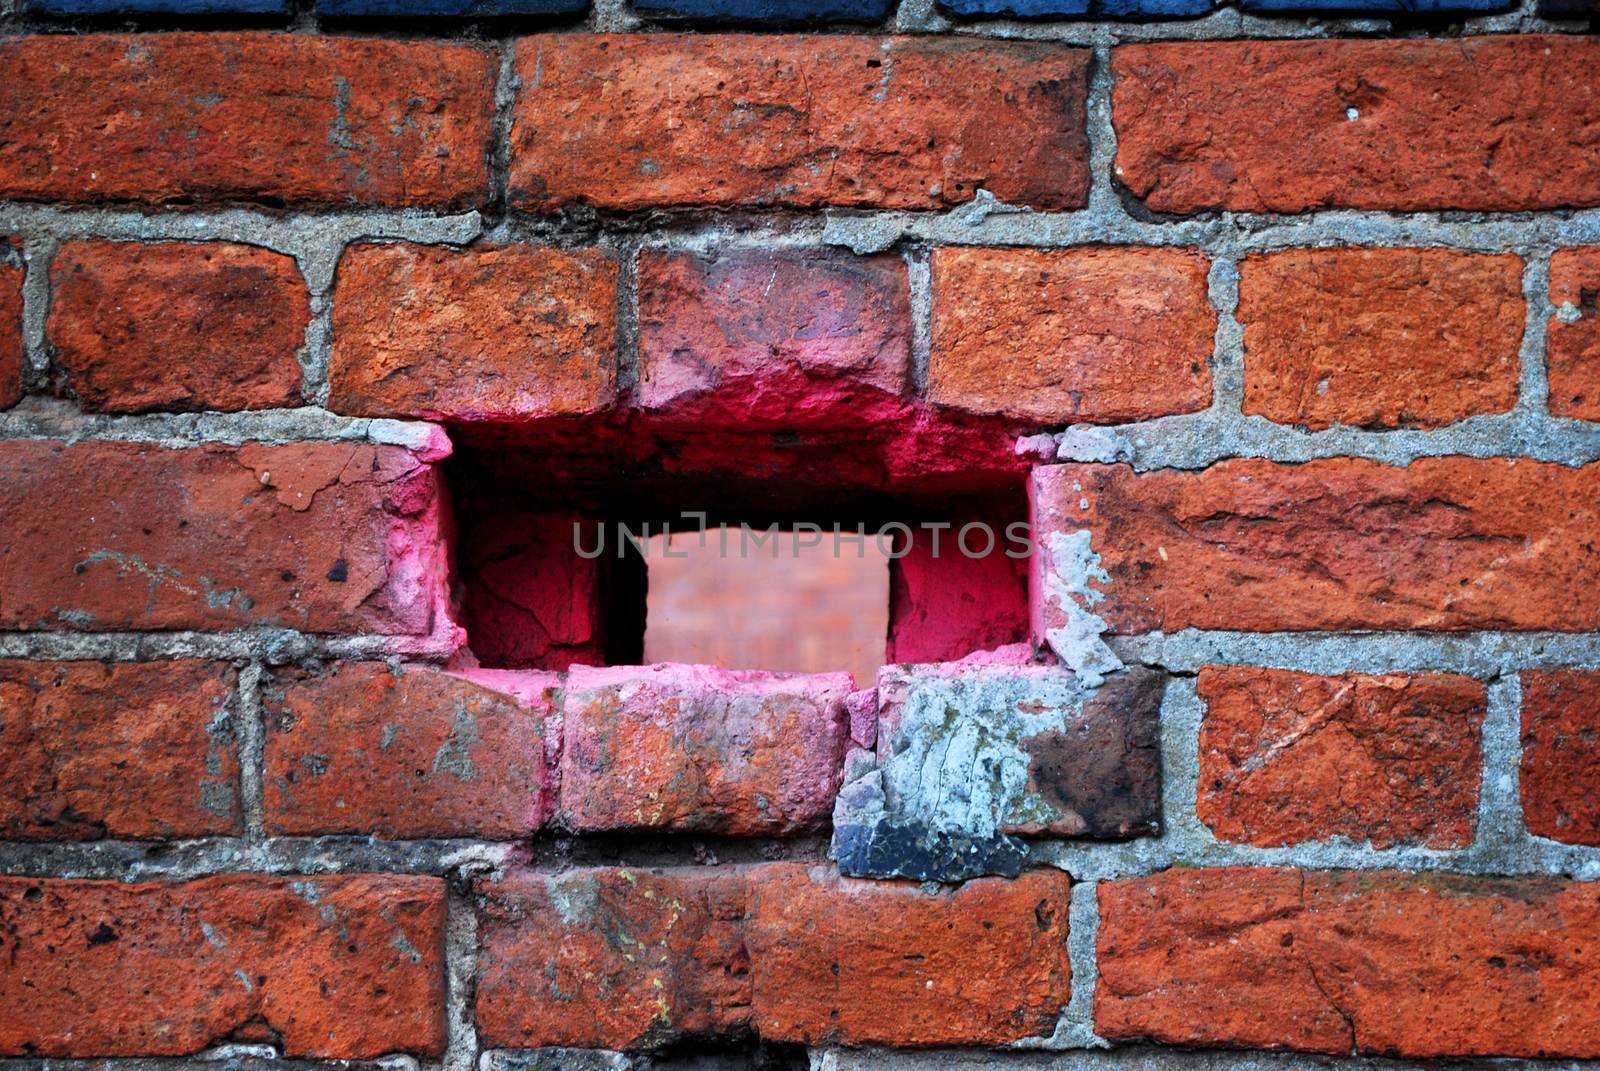 A hole in a brick wall that has been spray painted pink